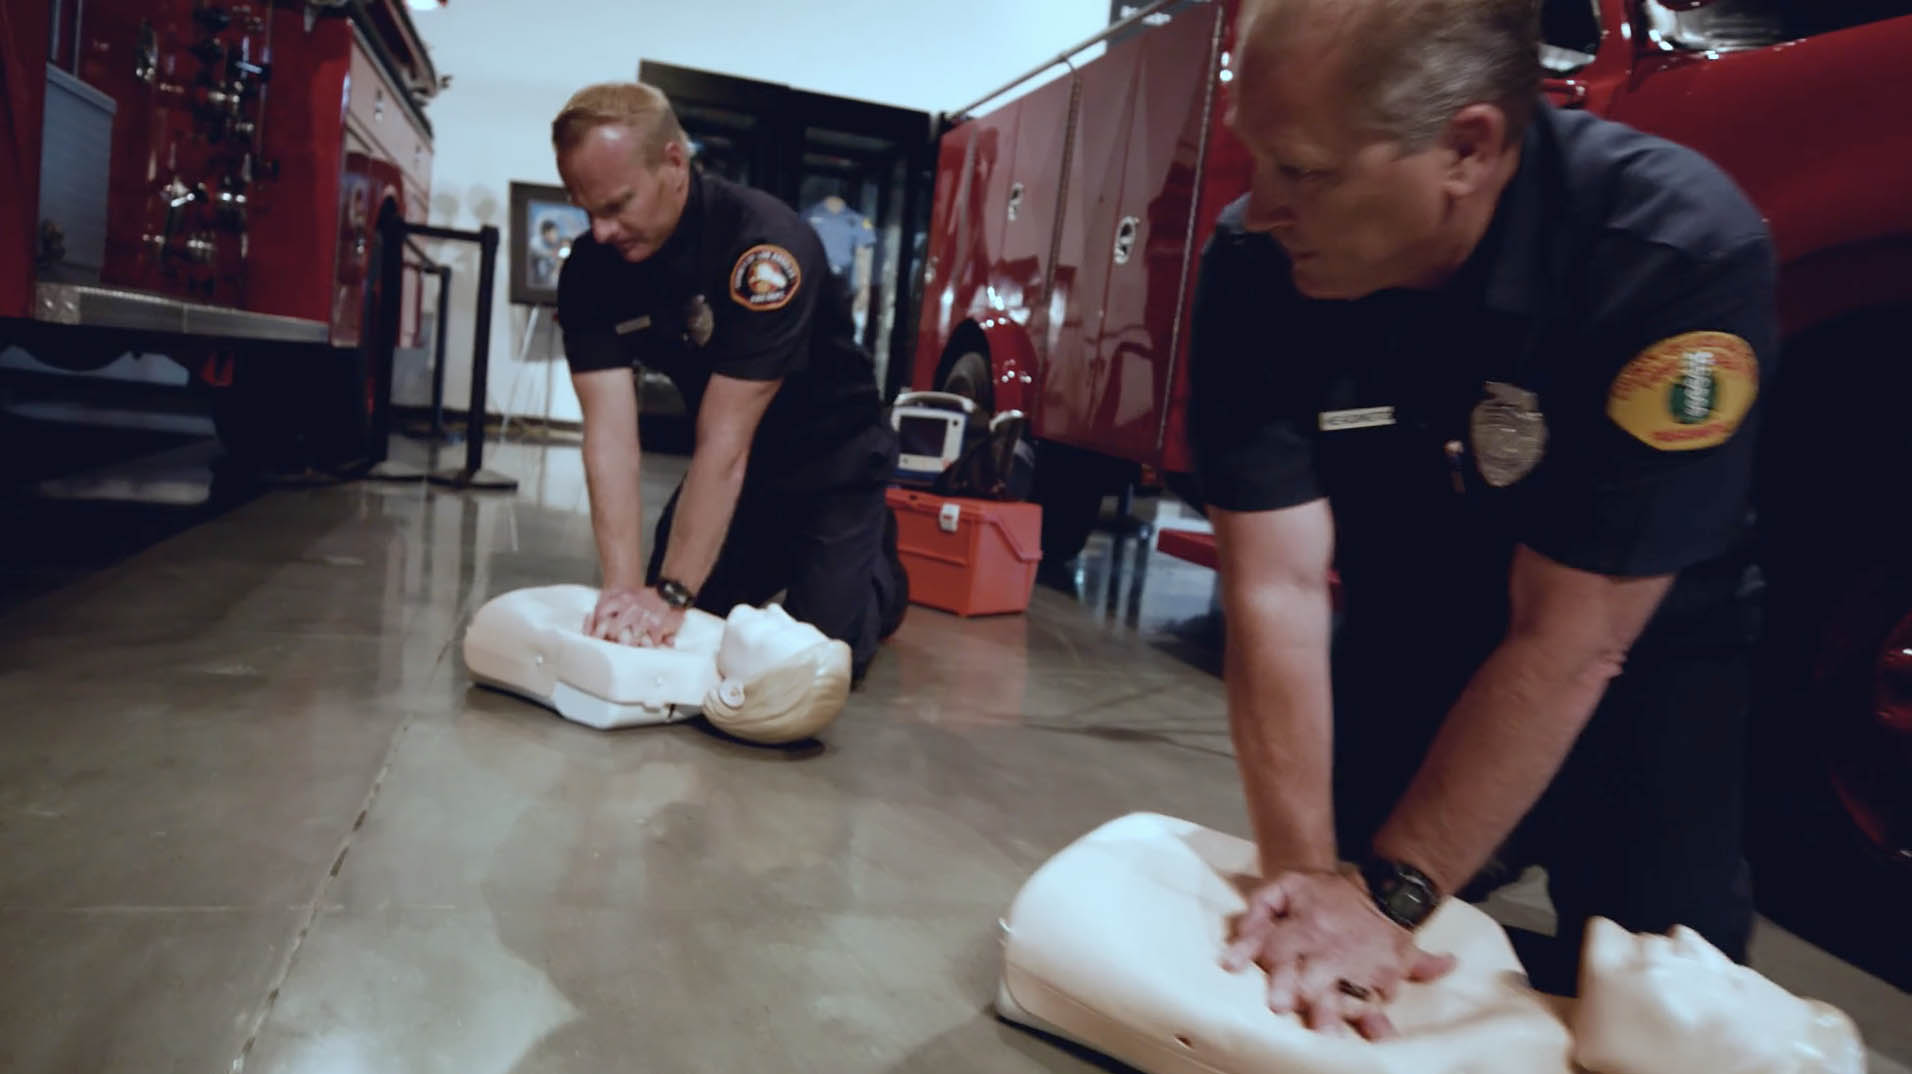 CPR being performed by Fire Fighters.